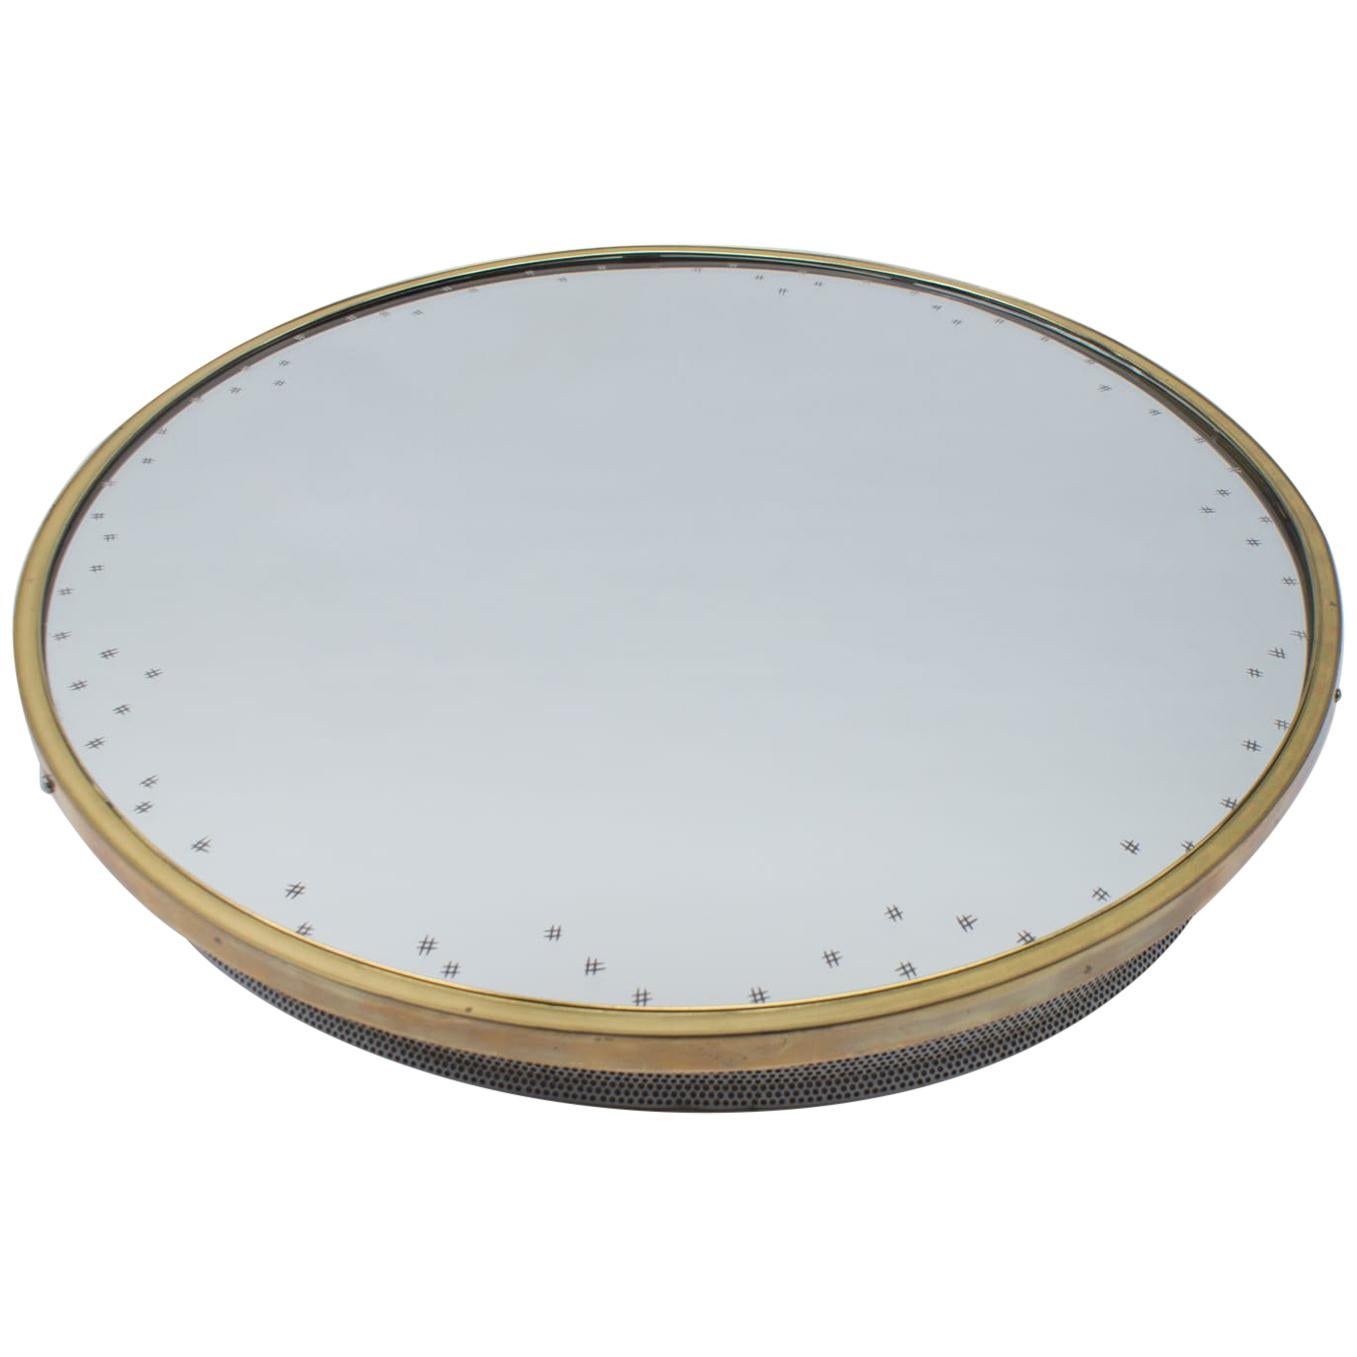 Backlit Brass wall Mirror With Engraved Stars and Perforated Plate Frame, 1950s